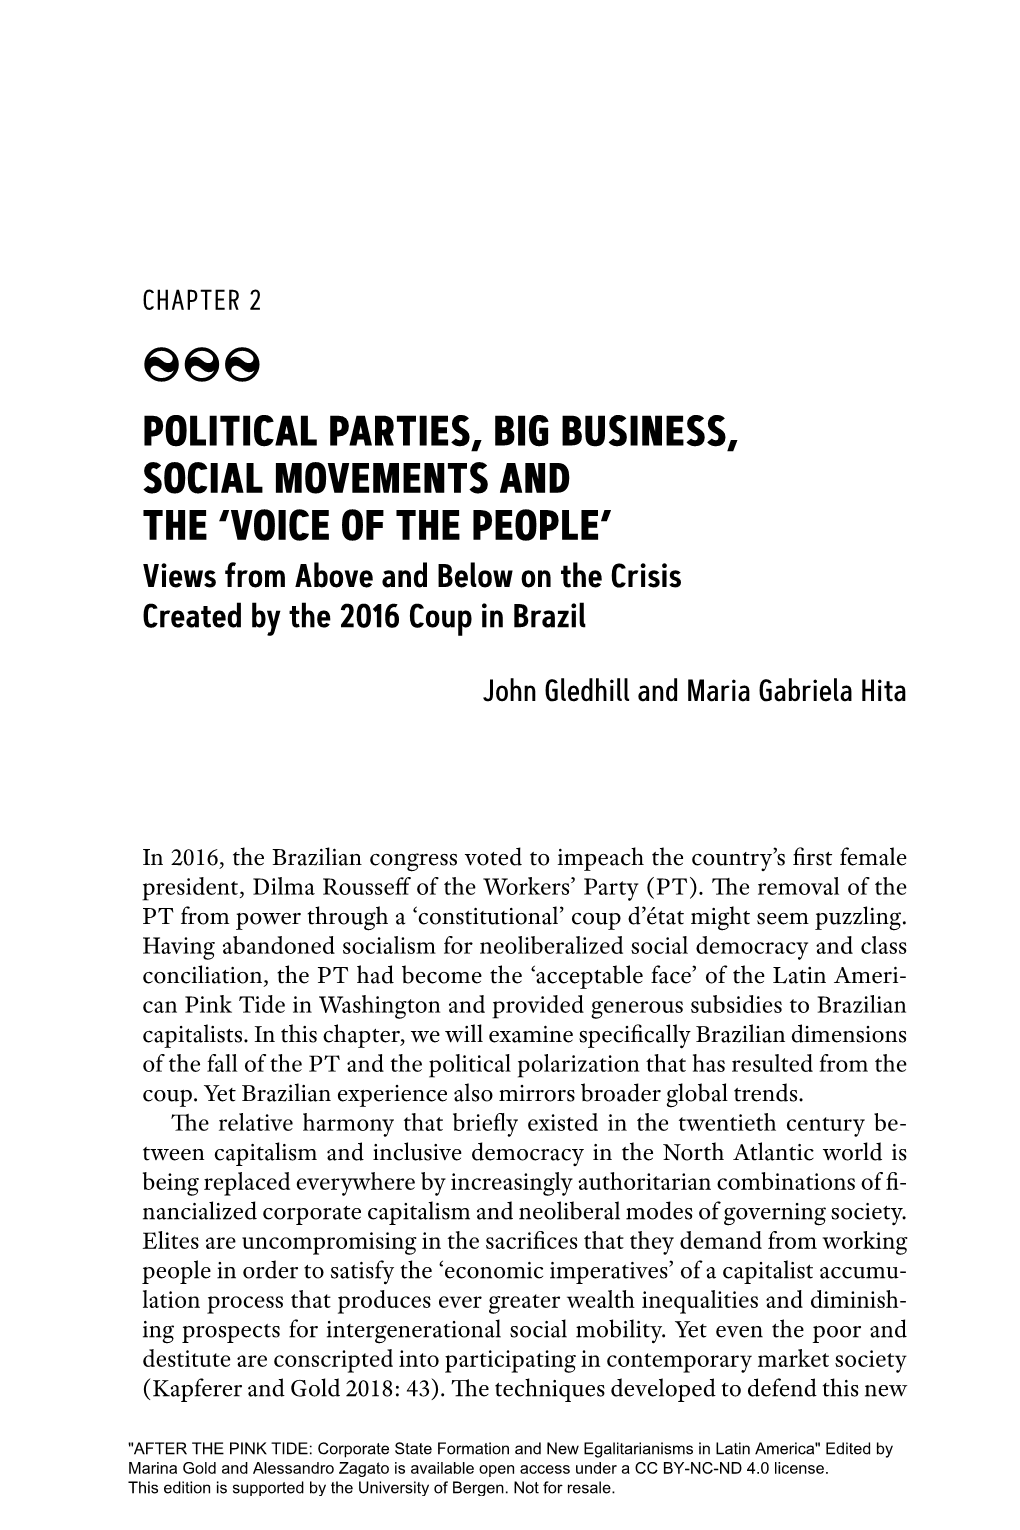 Political Parties, Big Business, Social Movements and the 'Voice of the People'